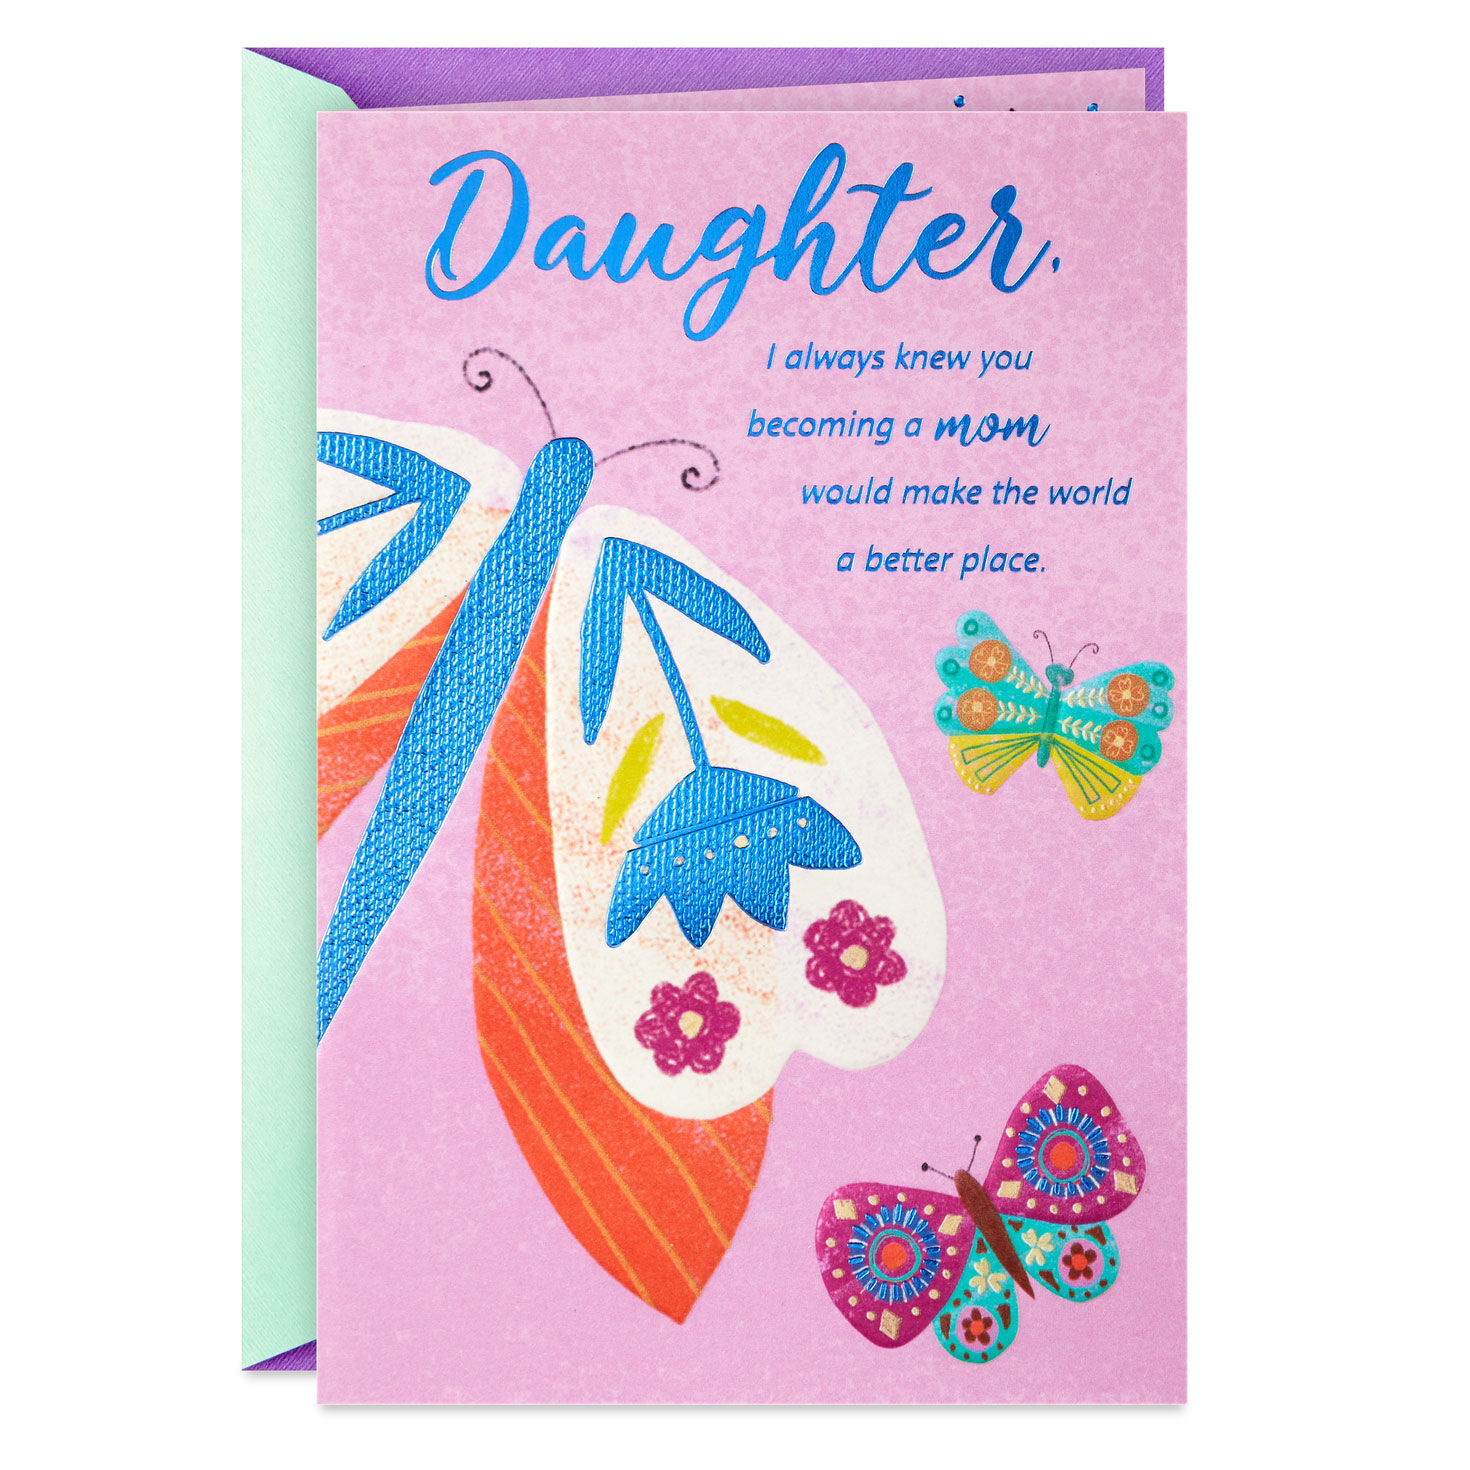 you-make-the-world-a-better-place-mother-s-day-card-for-daughter